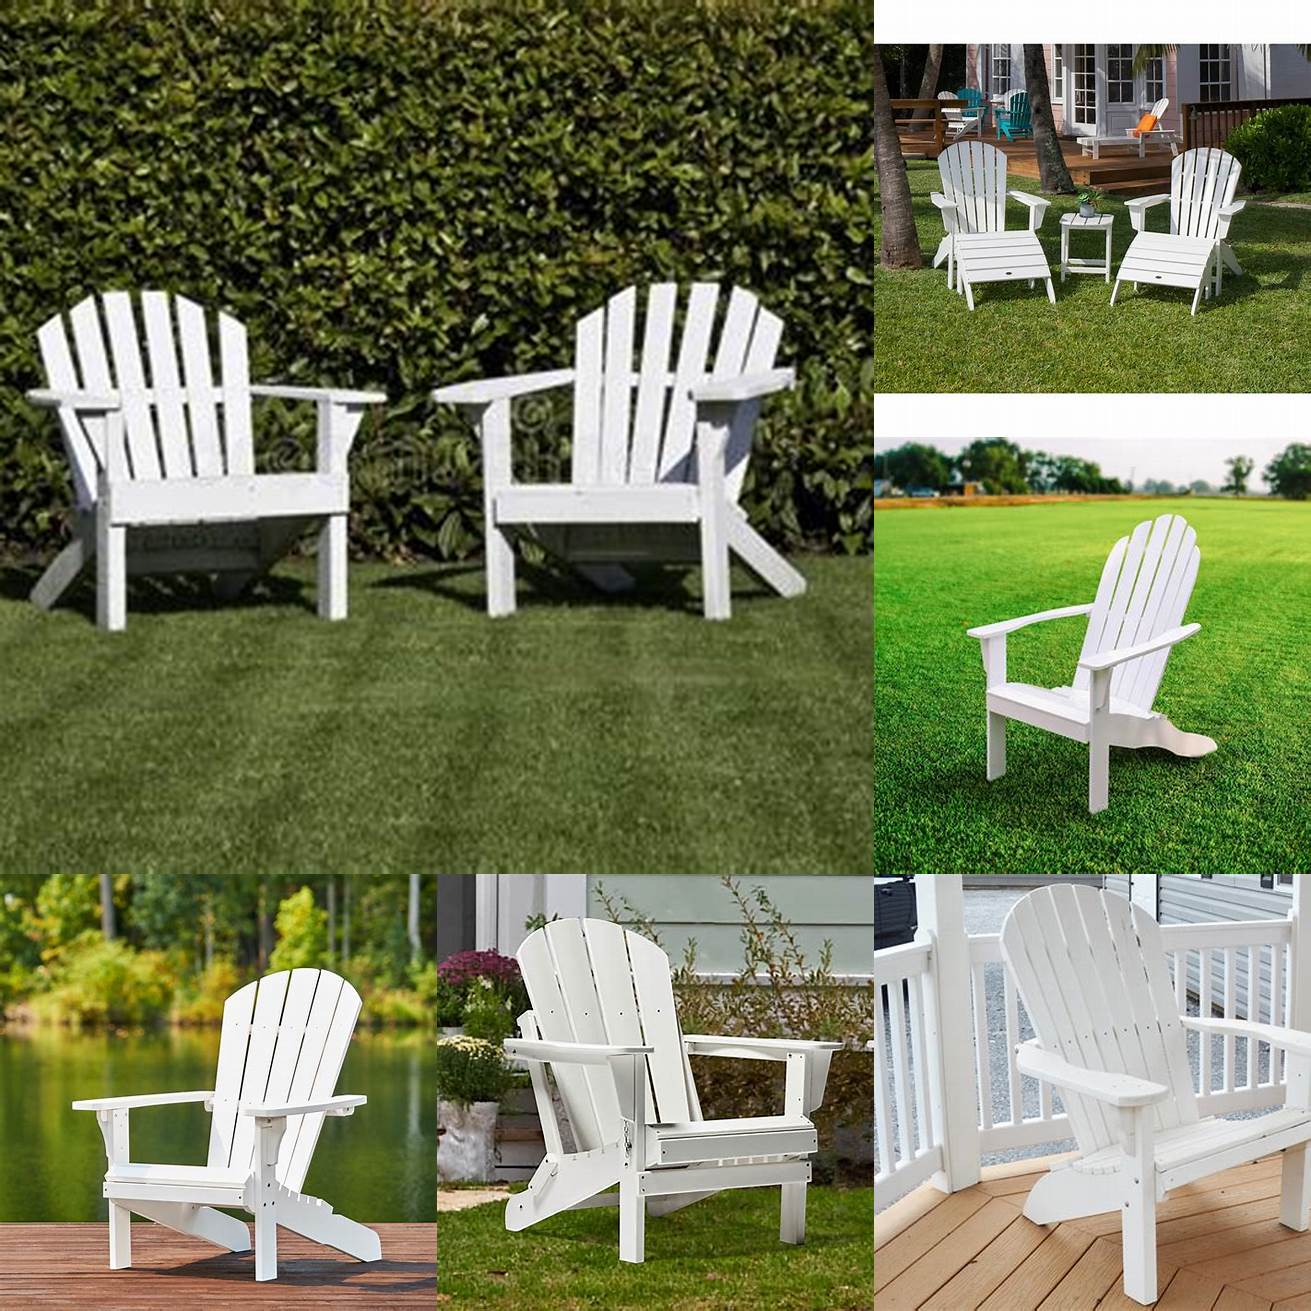 A pair of white Adirondack chairs on a lush lawn